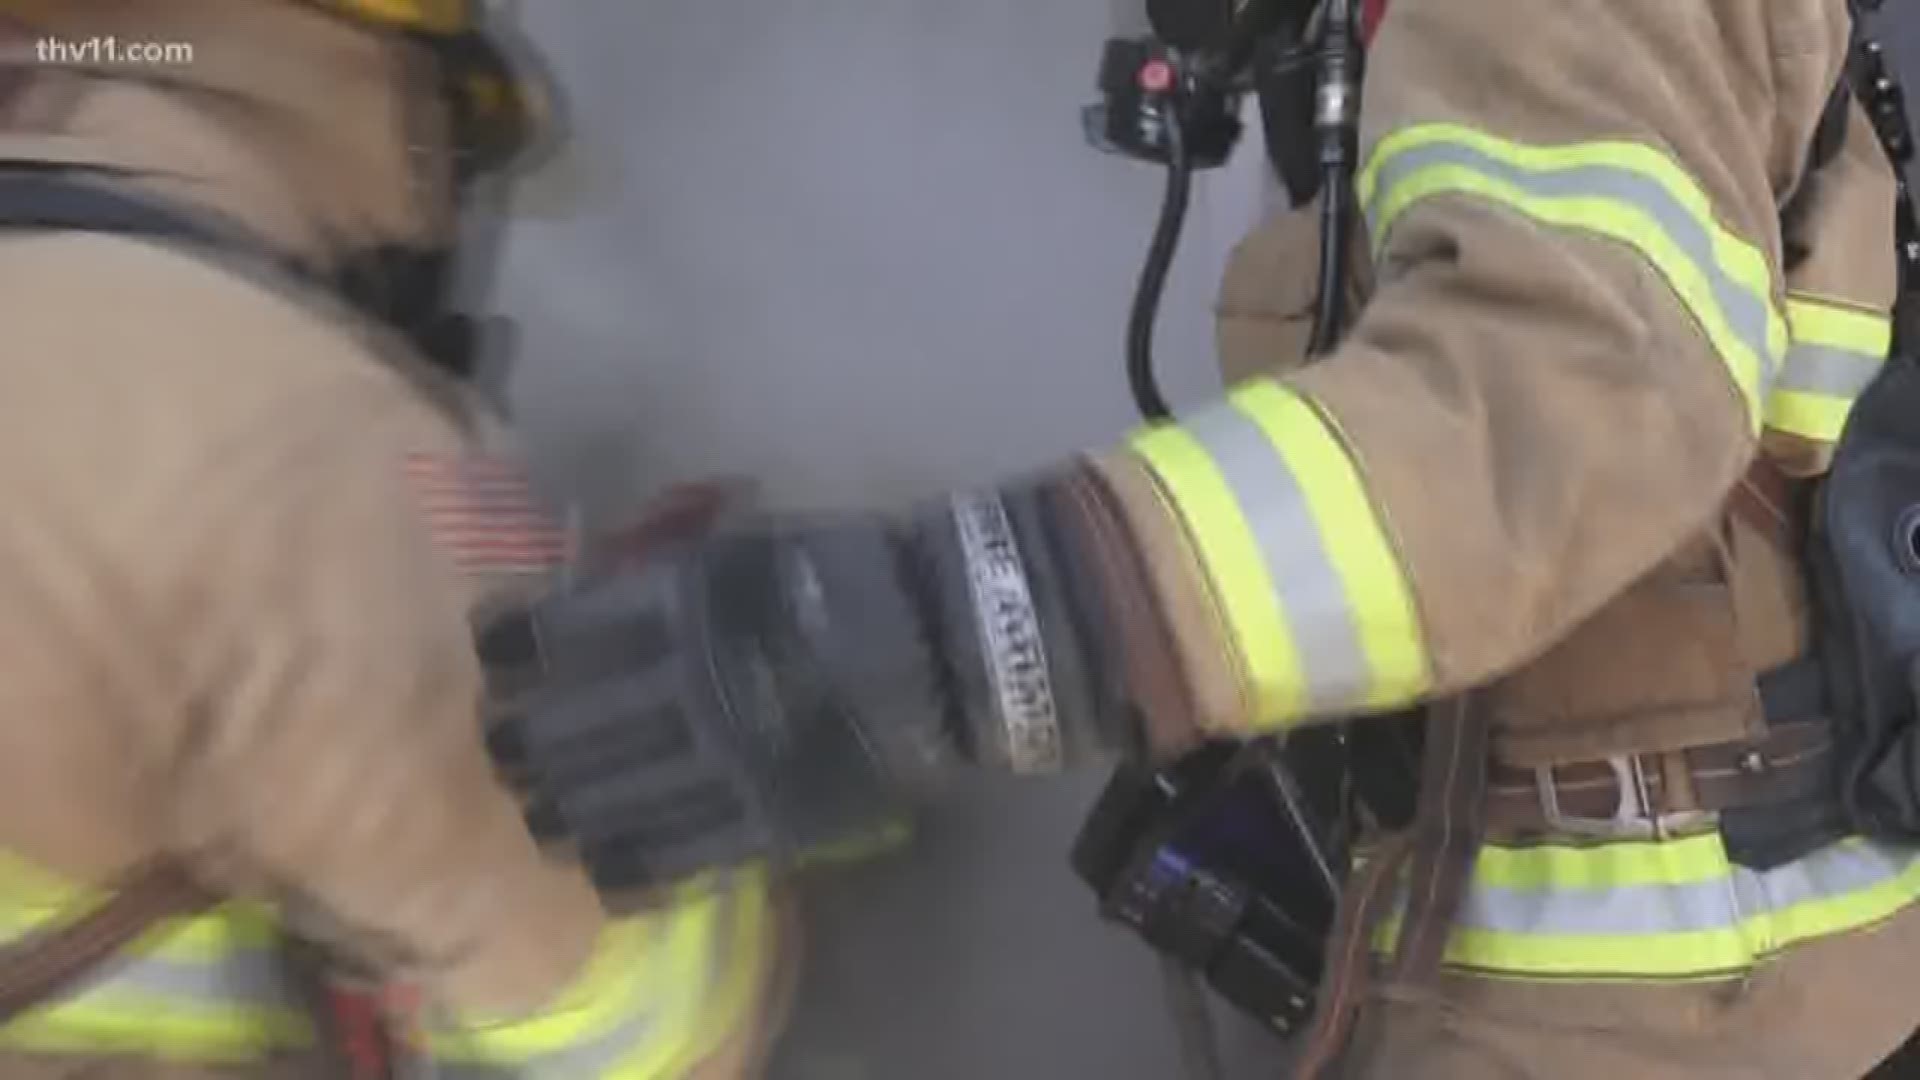 Every second counts when firefighters storm into a home filled with smoke to save someone's life. But getting real-life scenario training doesn't happen often.